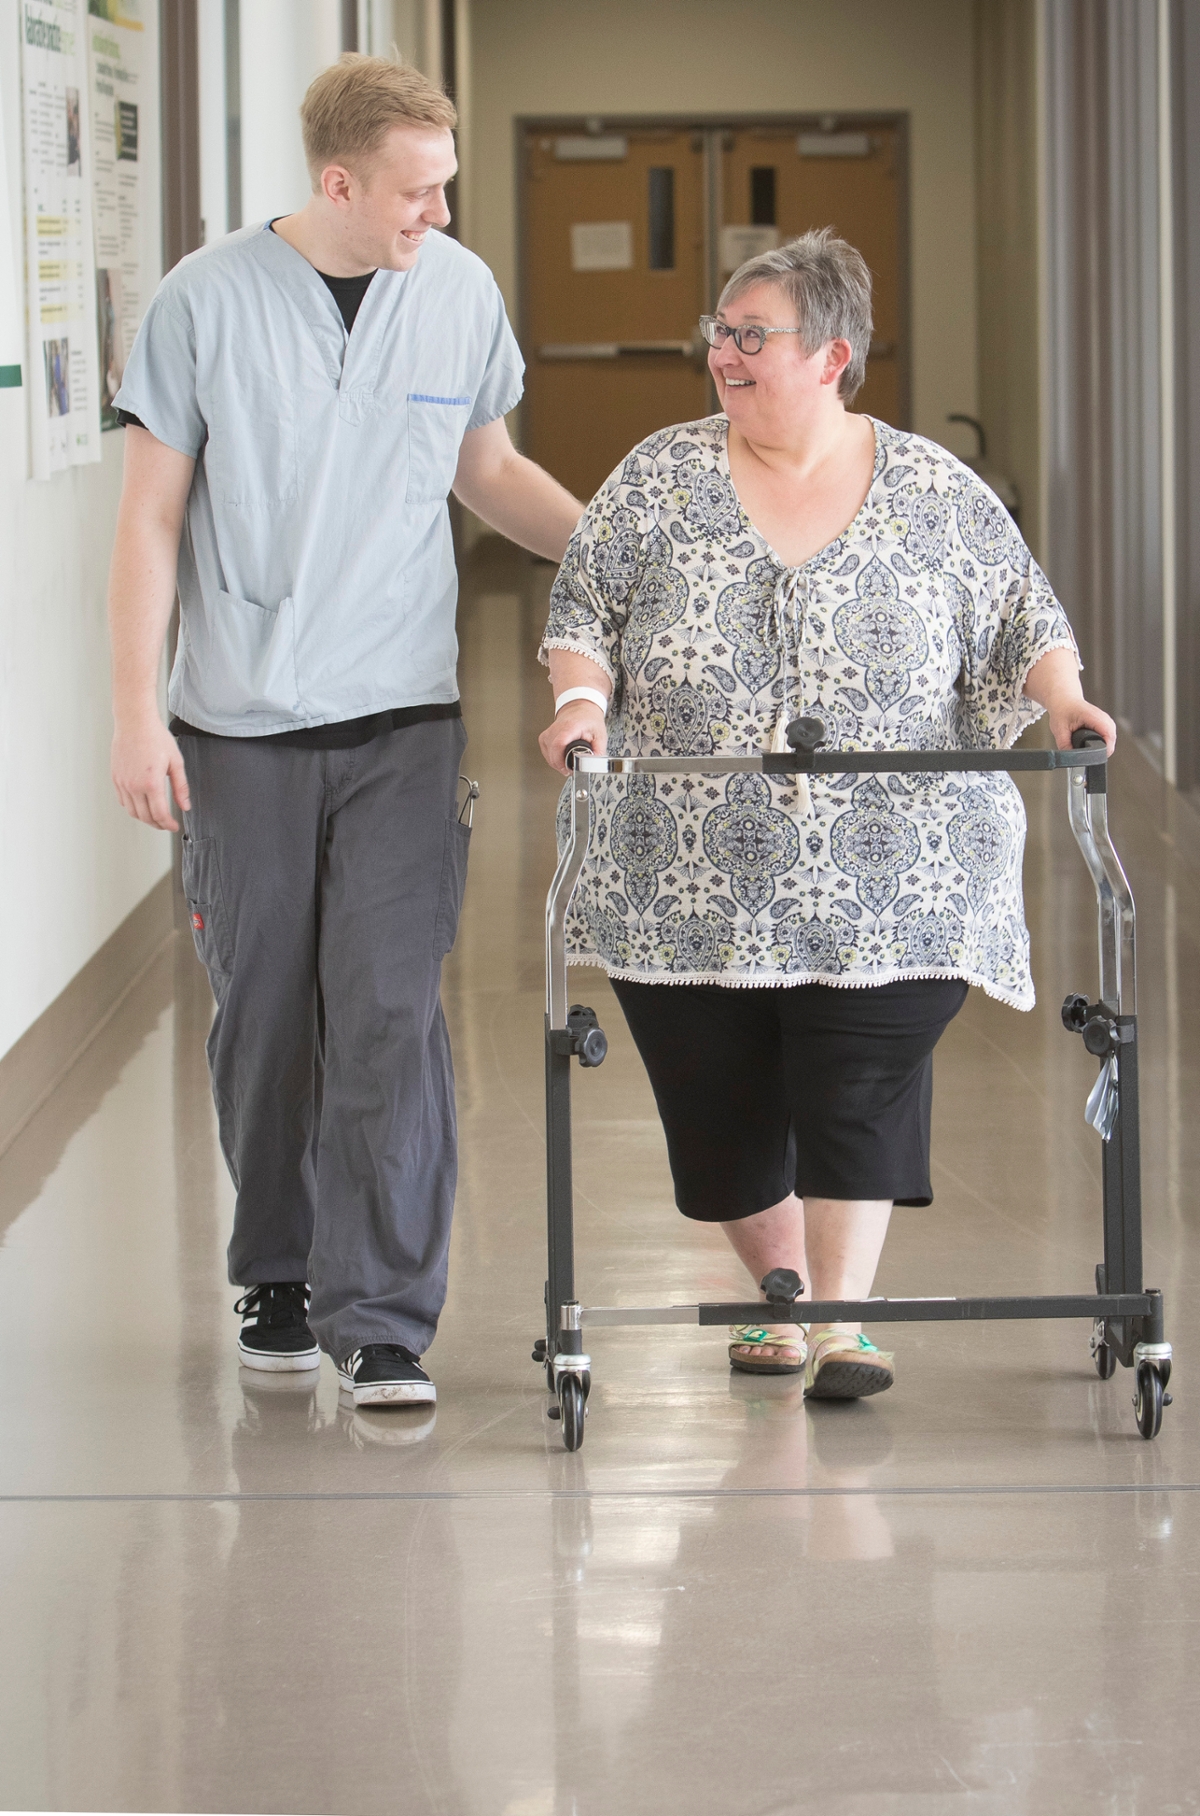 clinician and obese patient with walker in hospital corridor